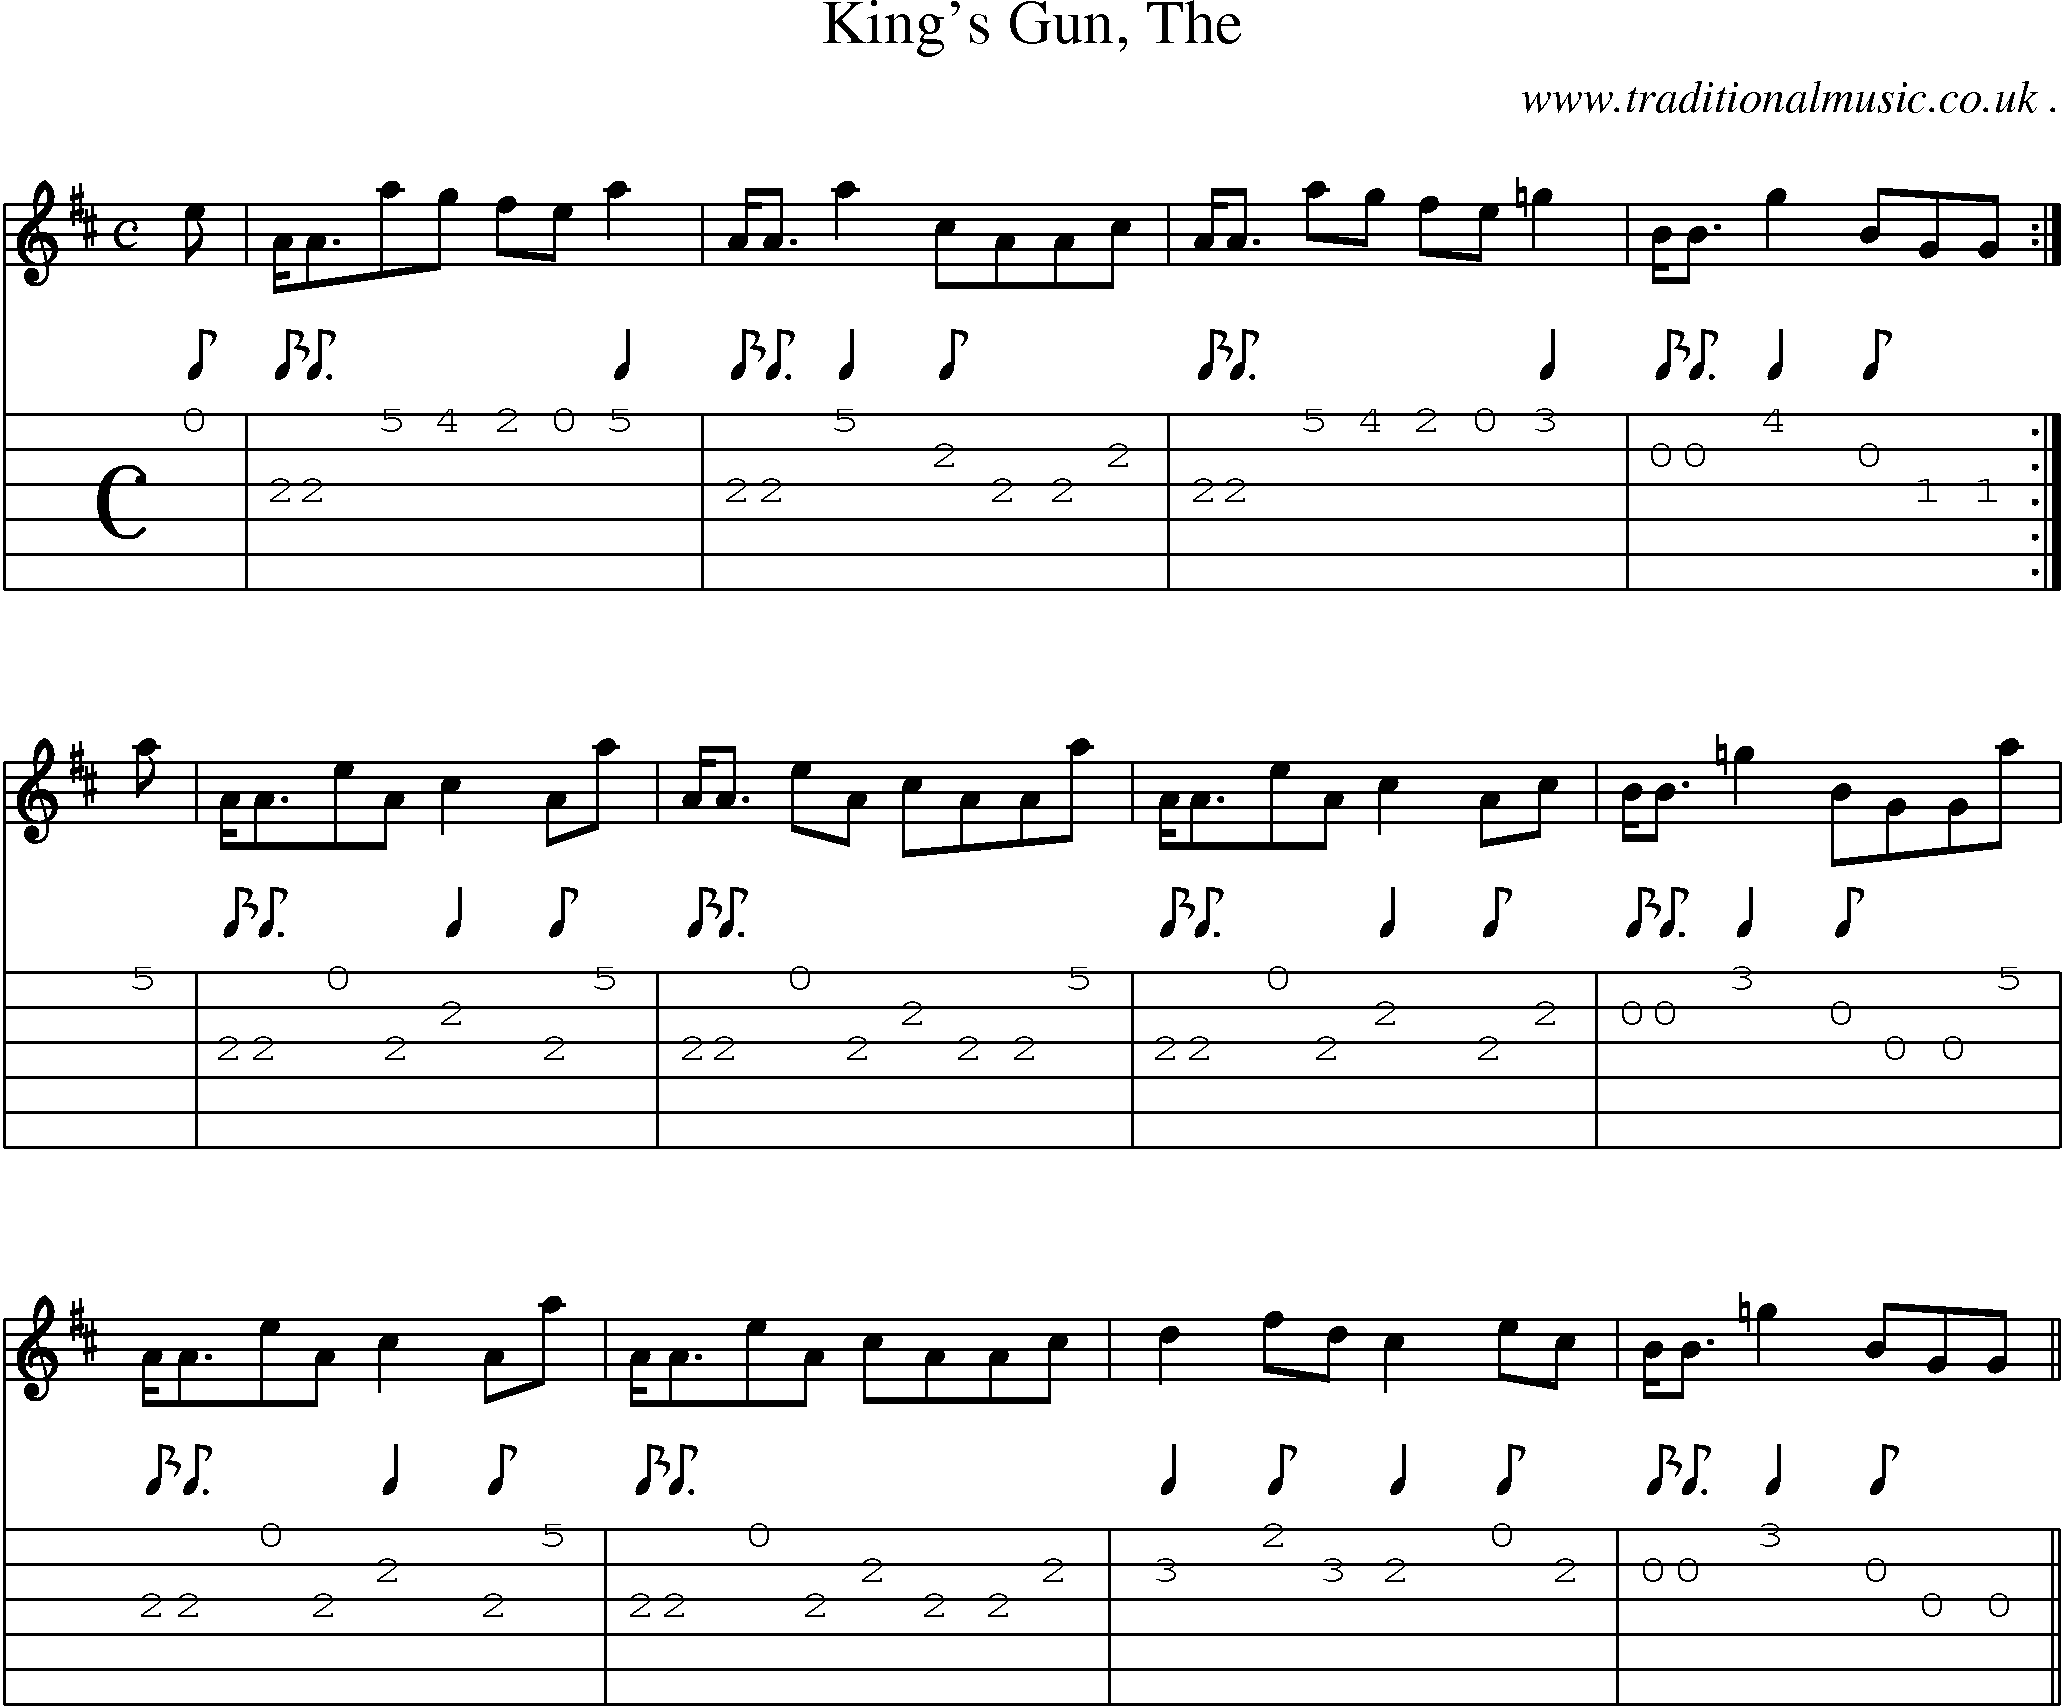 Sheet-music  score, Chords and Guitar Tabs for Kings Gun The